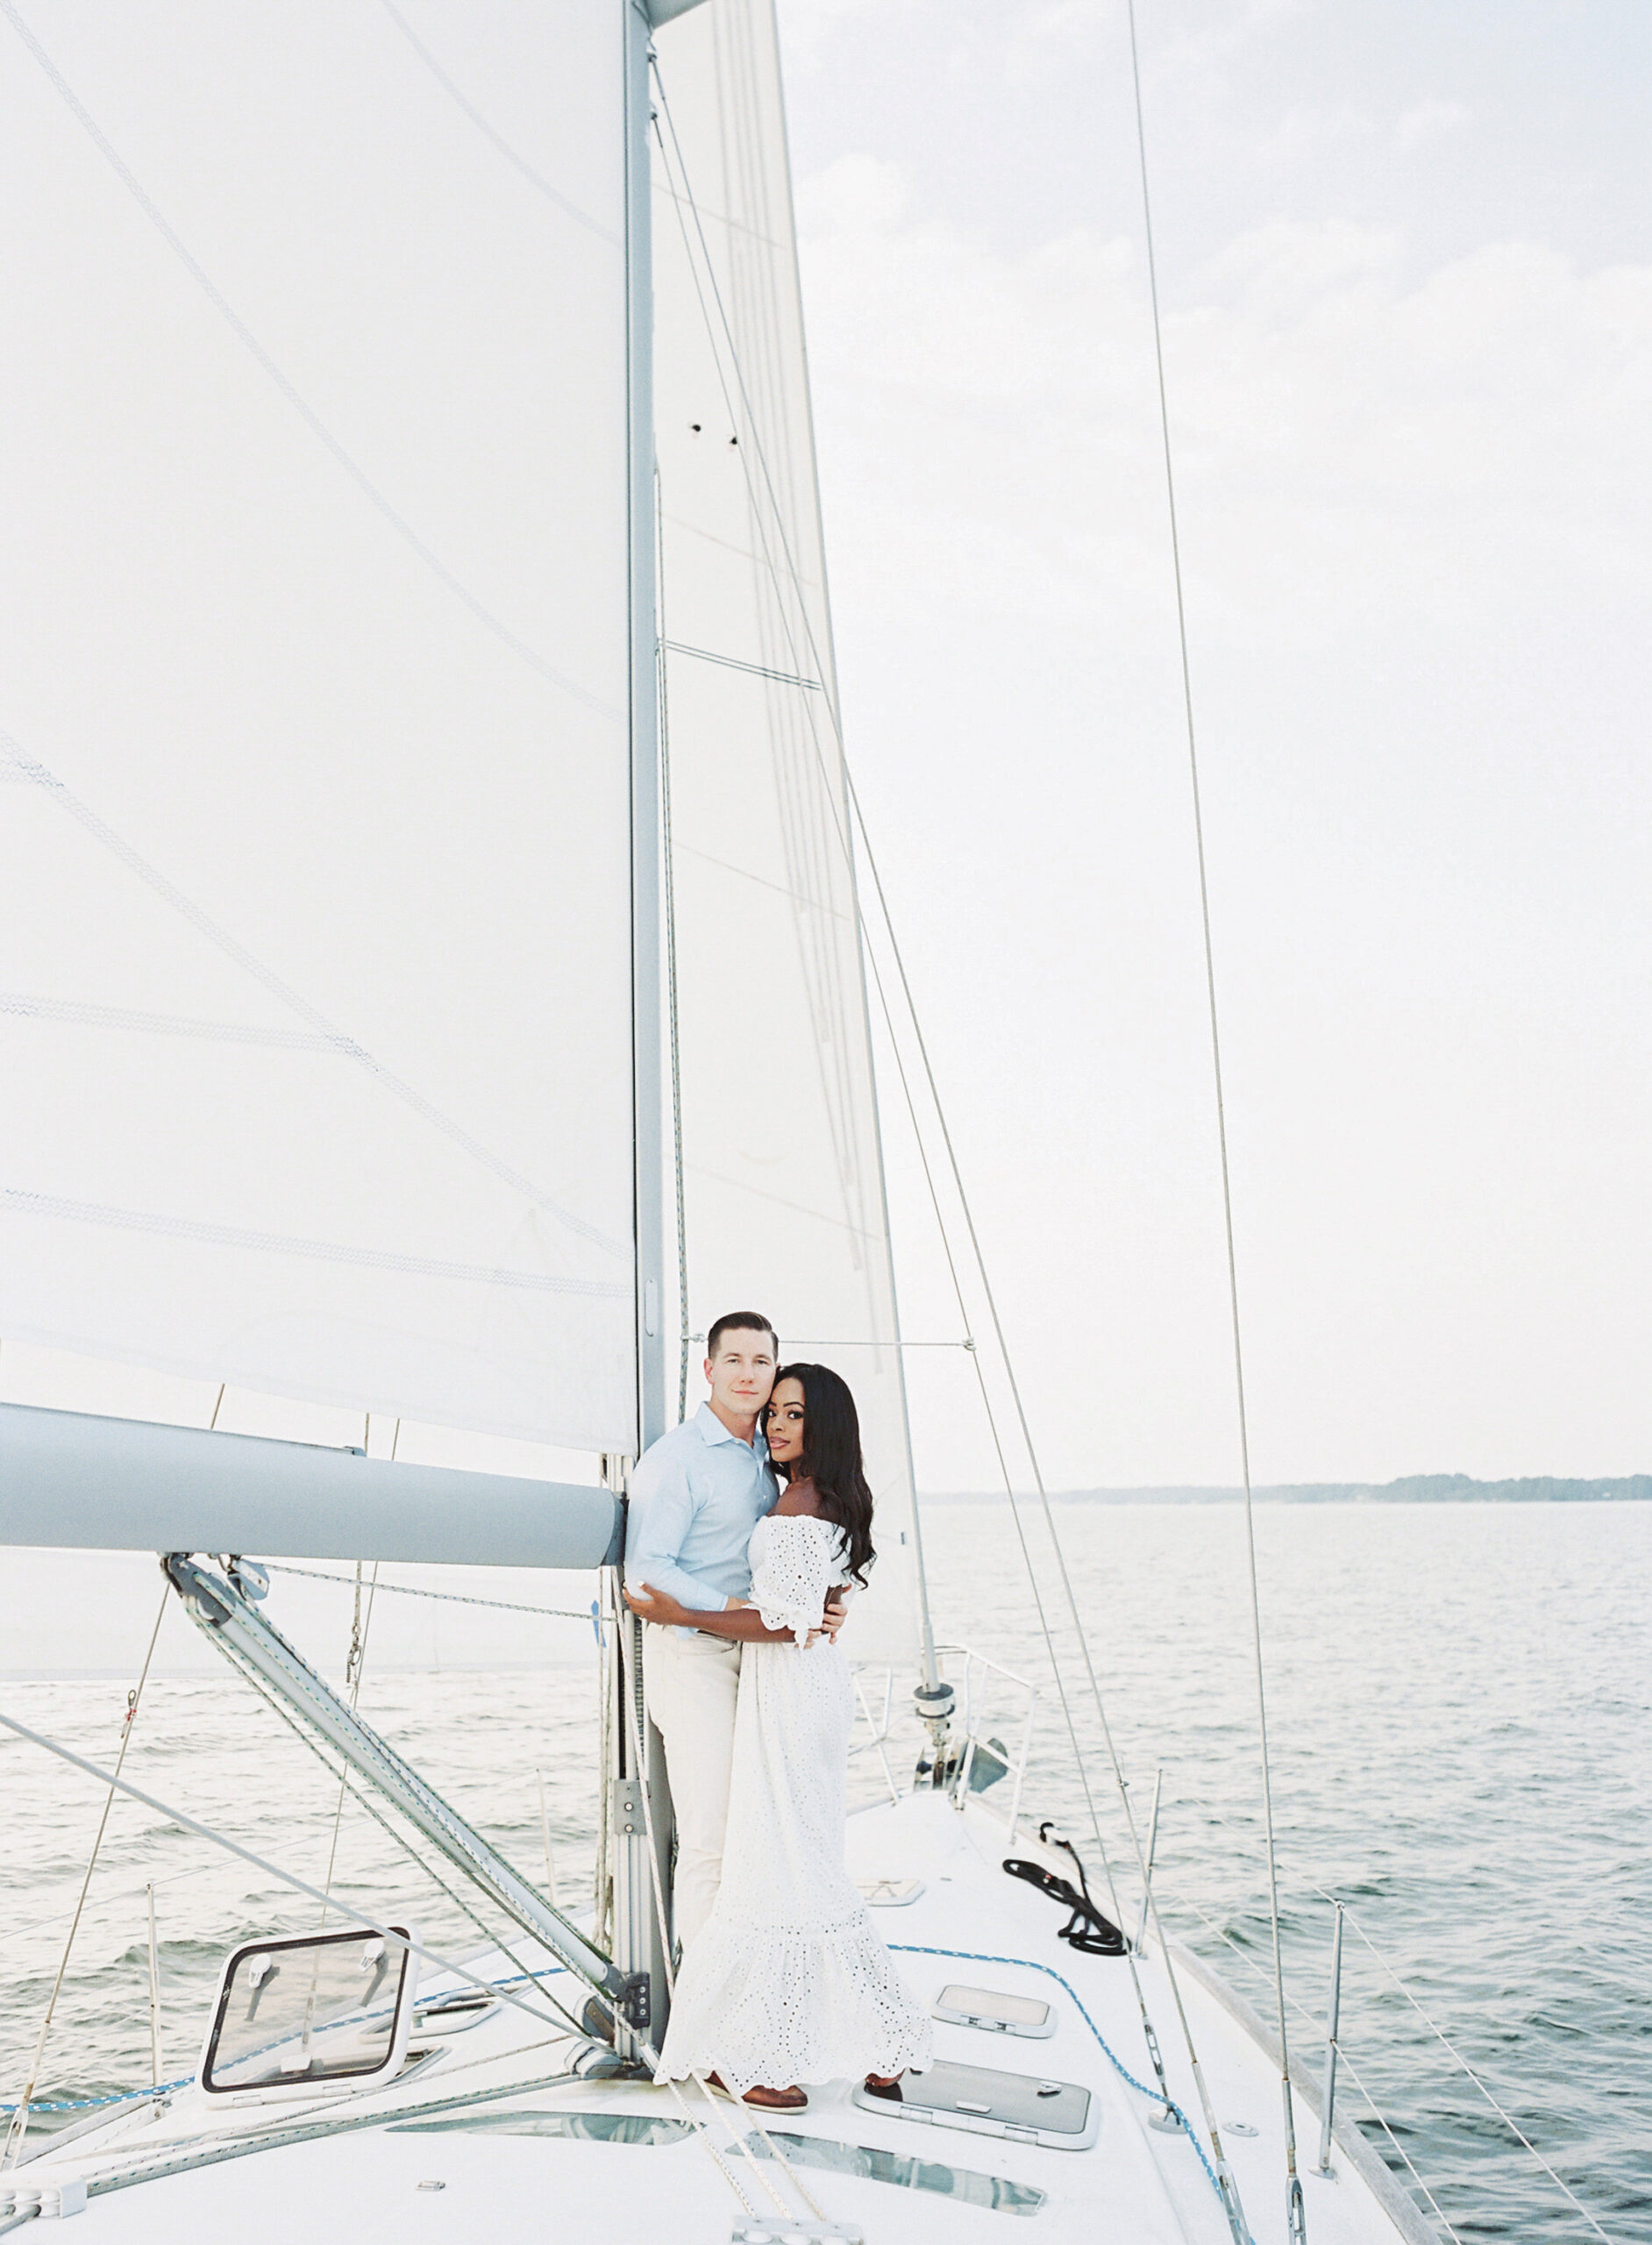 engagement on the boat Archives - Wedding on the Boat - Bematur